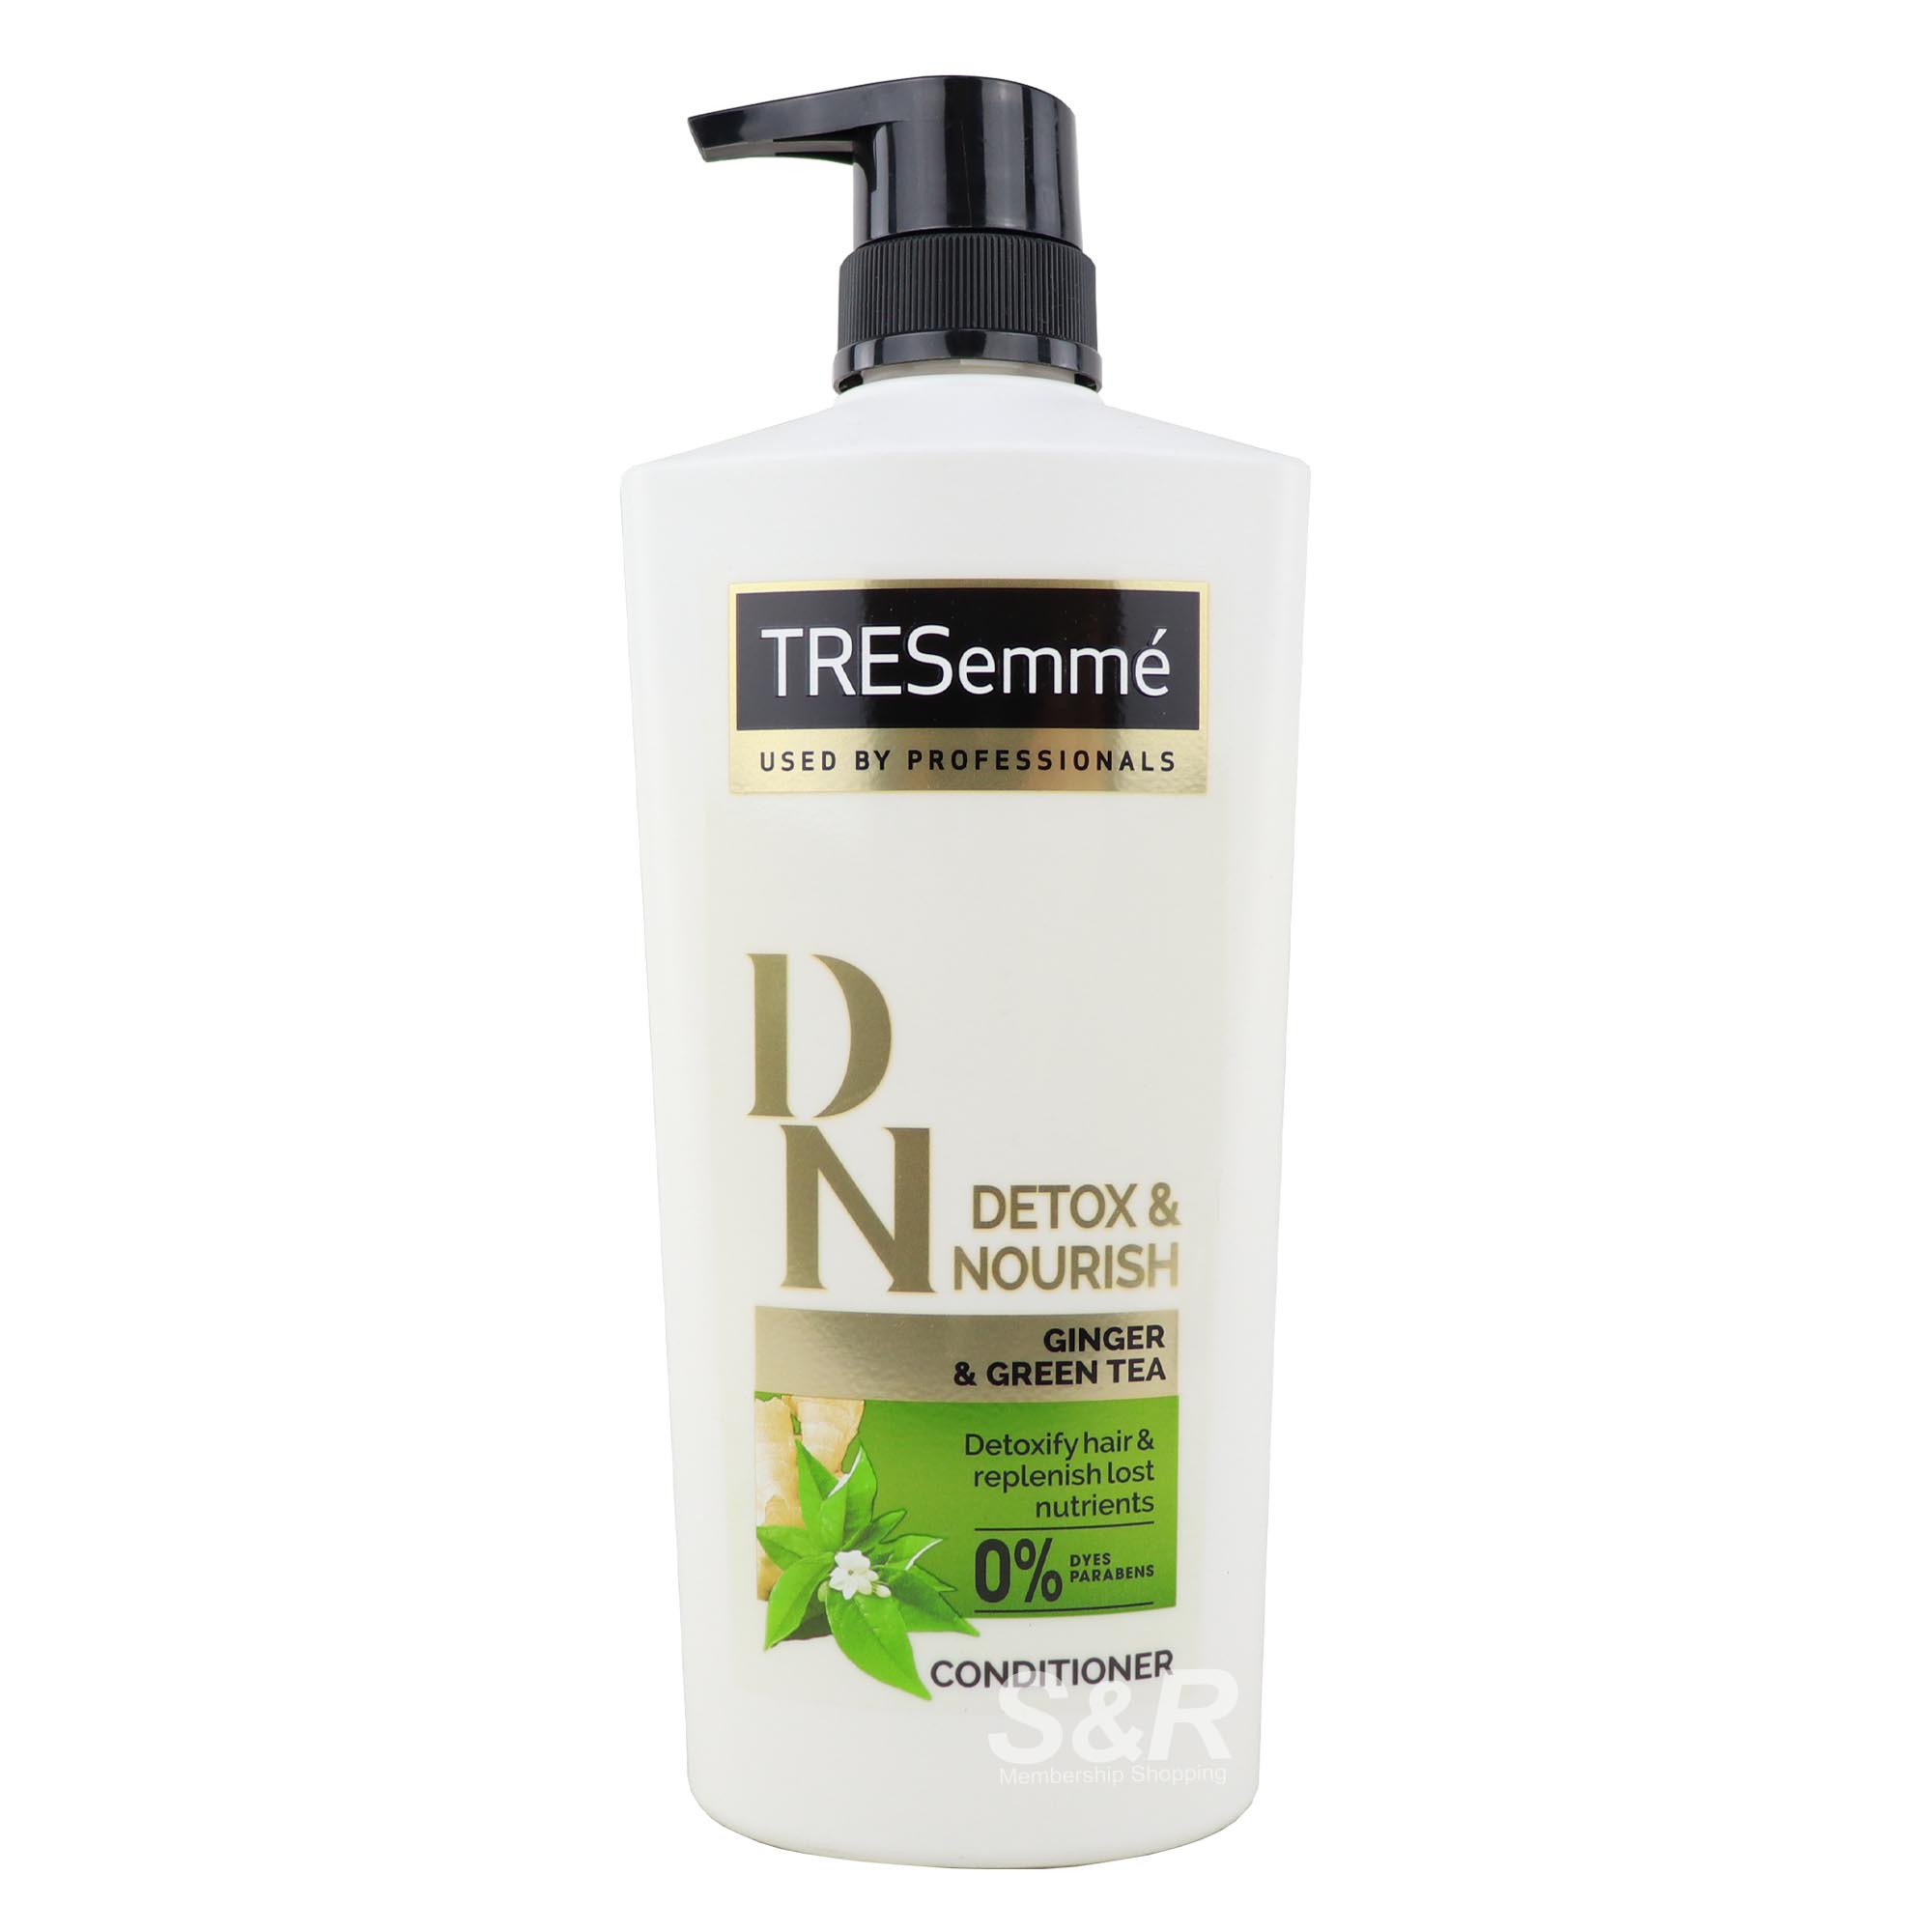 Tresemme Detox and Nourish in Ginger and Green Tea Conditioner 620mL